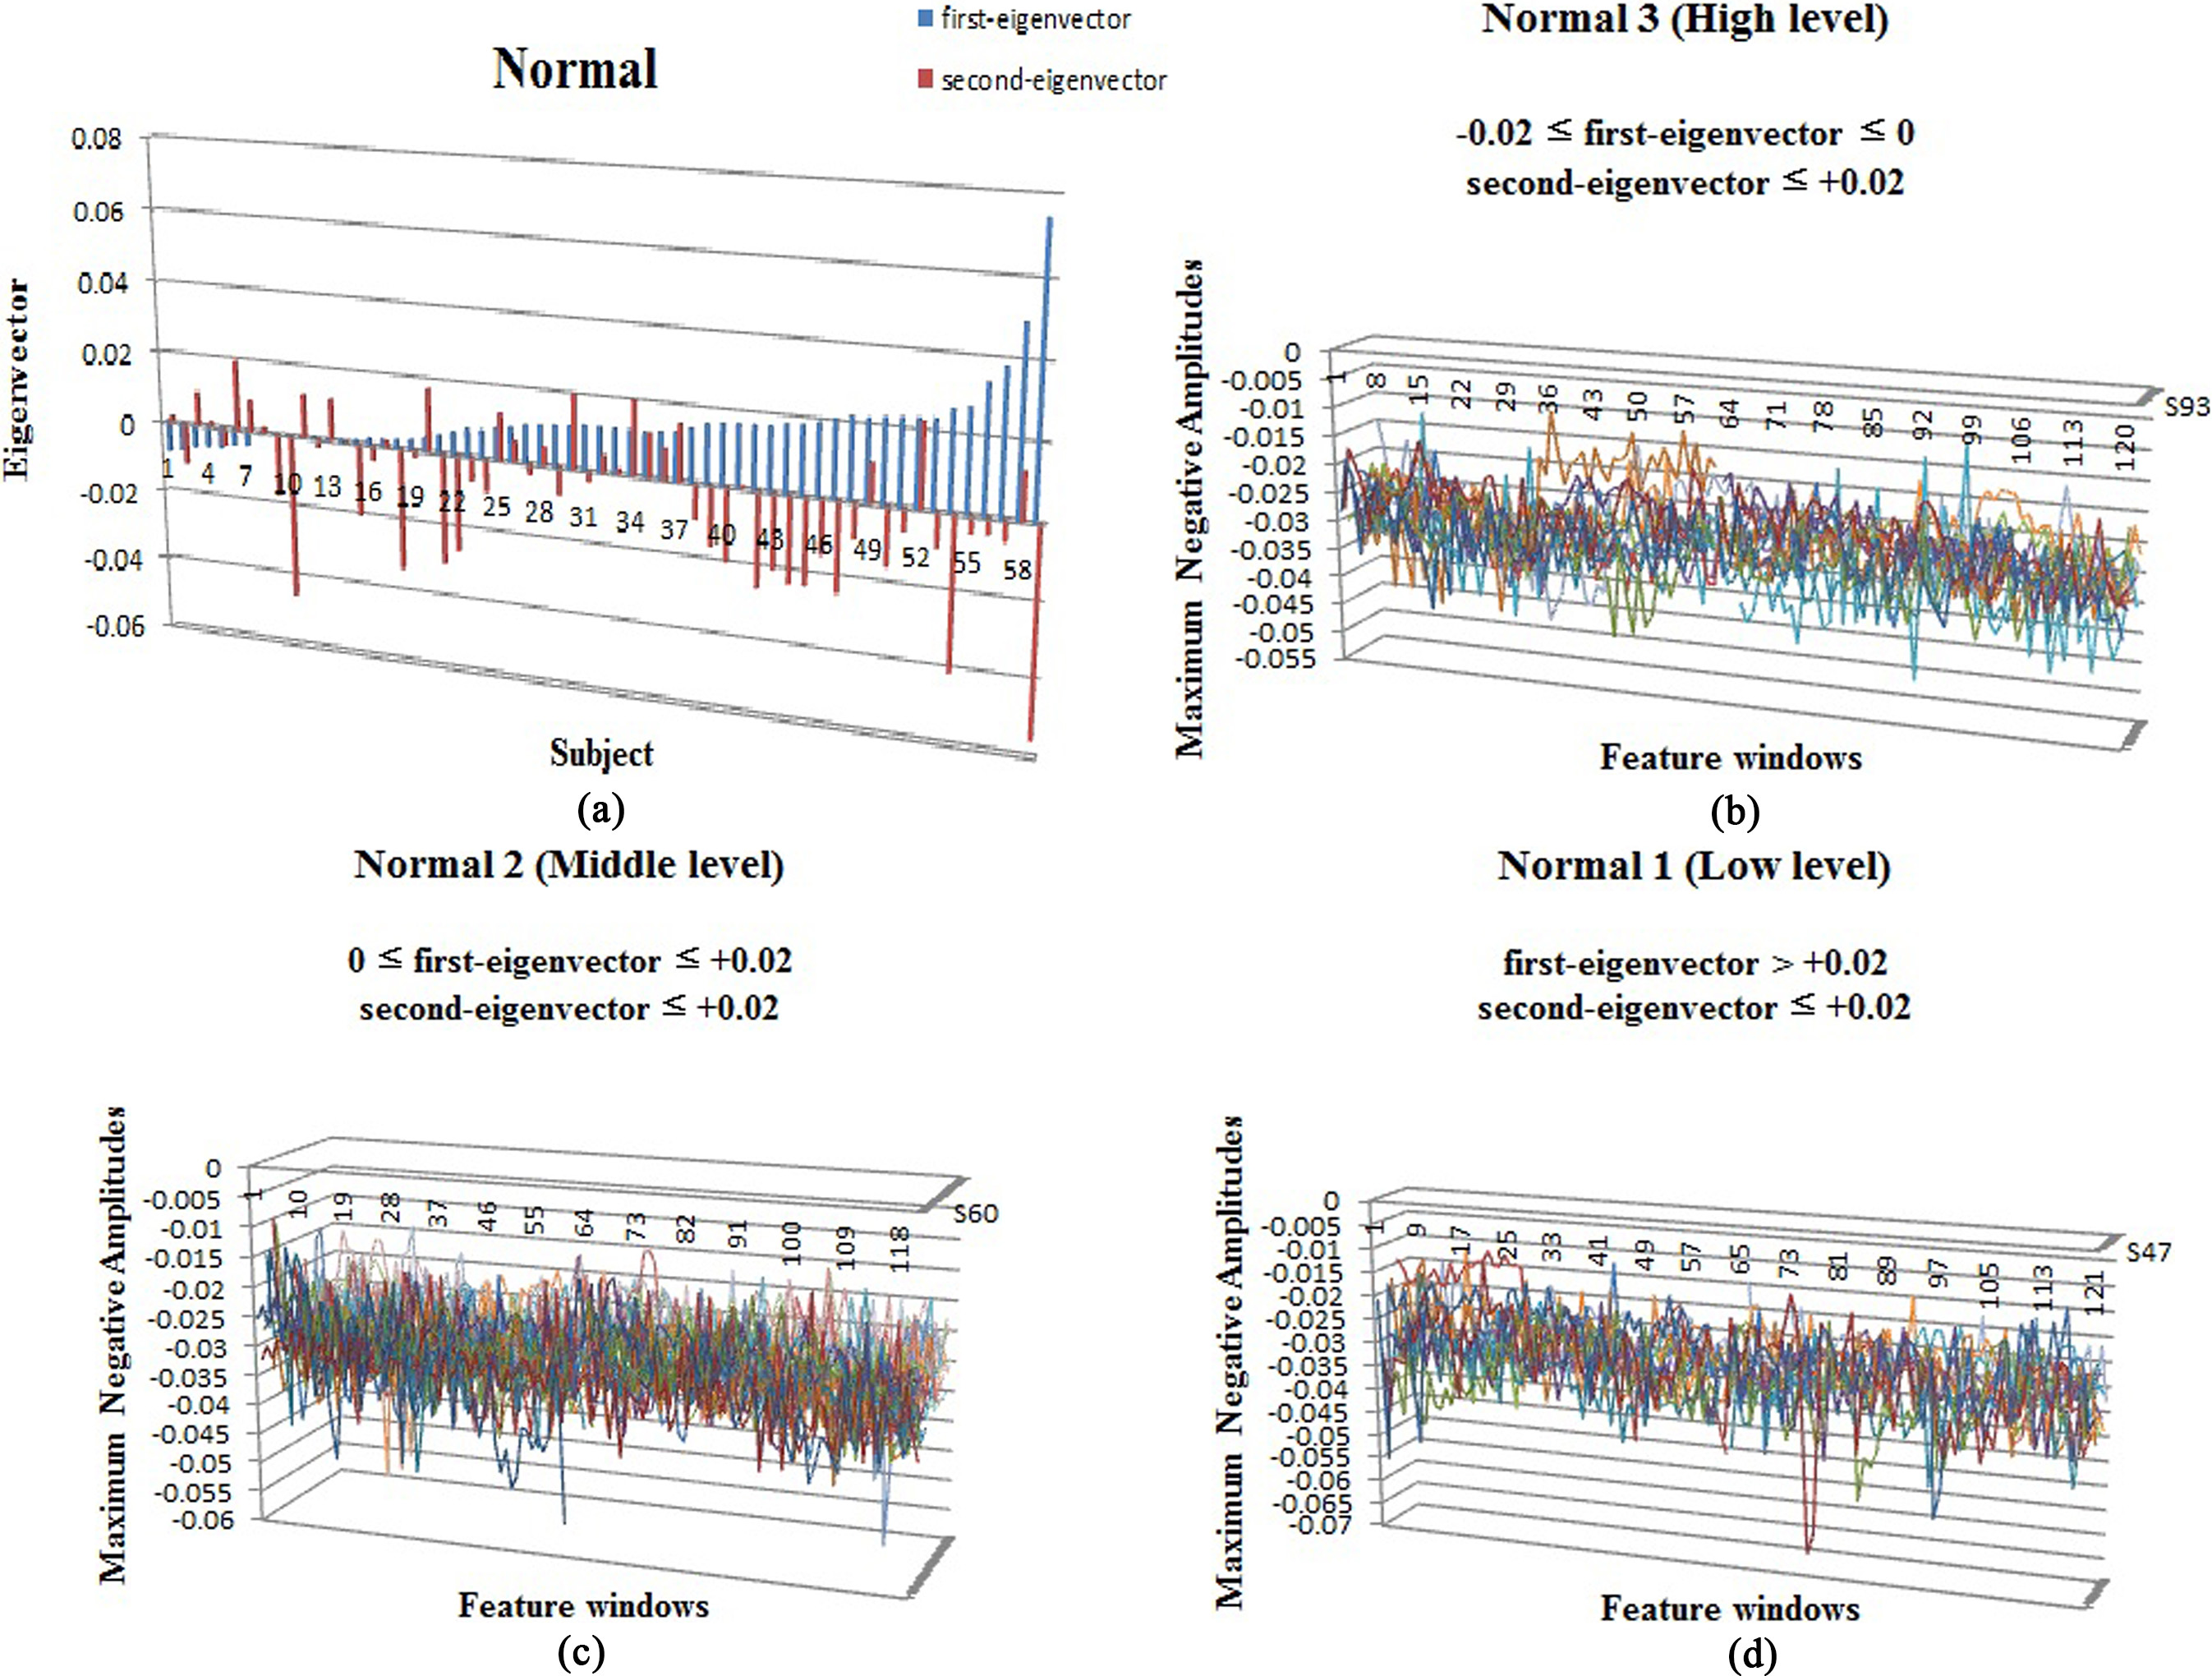 a. Analysis of first-eigenvector and second-eigenvector of normal BP; b. MLA waveform distribution of normal 3 (high-level); c. MLA waveform distribution of normal 2 (middle-level); d. MLA waveform distribution of normal 1 (low-level).